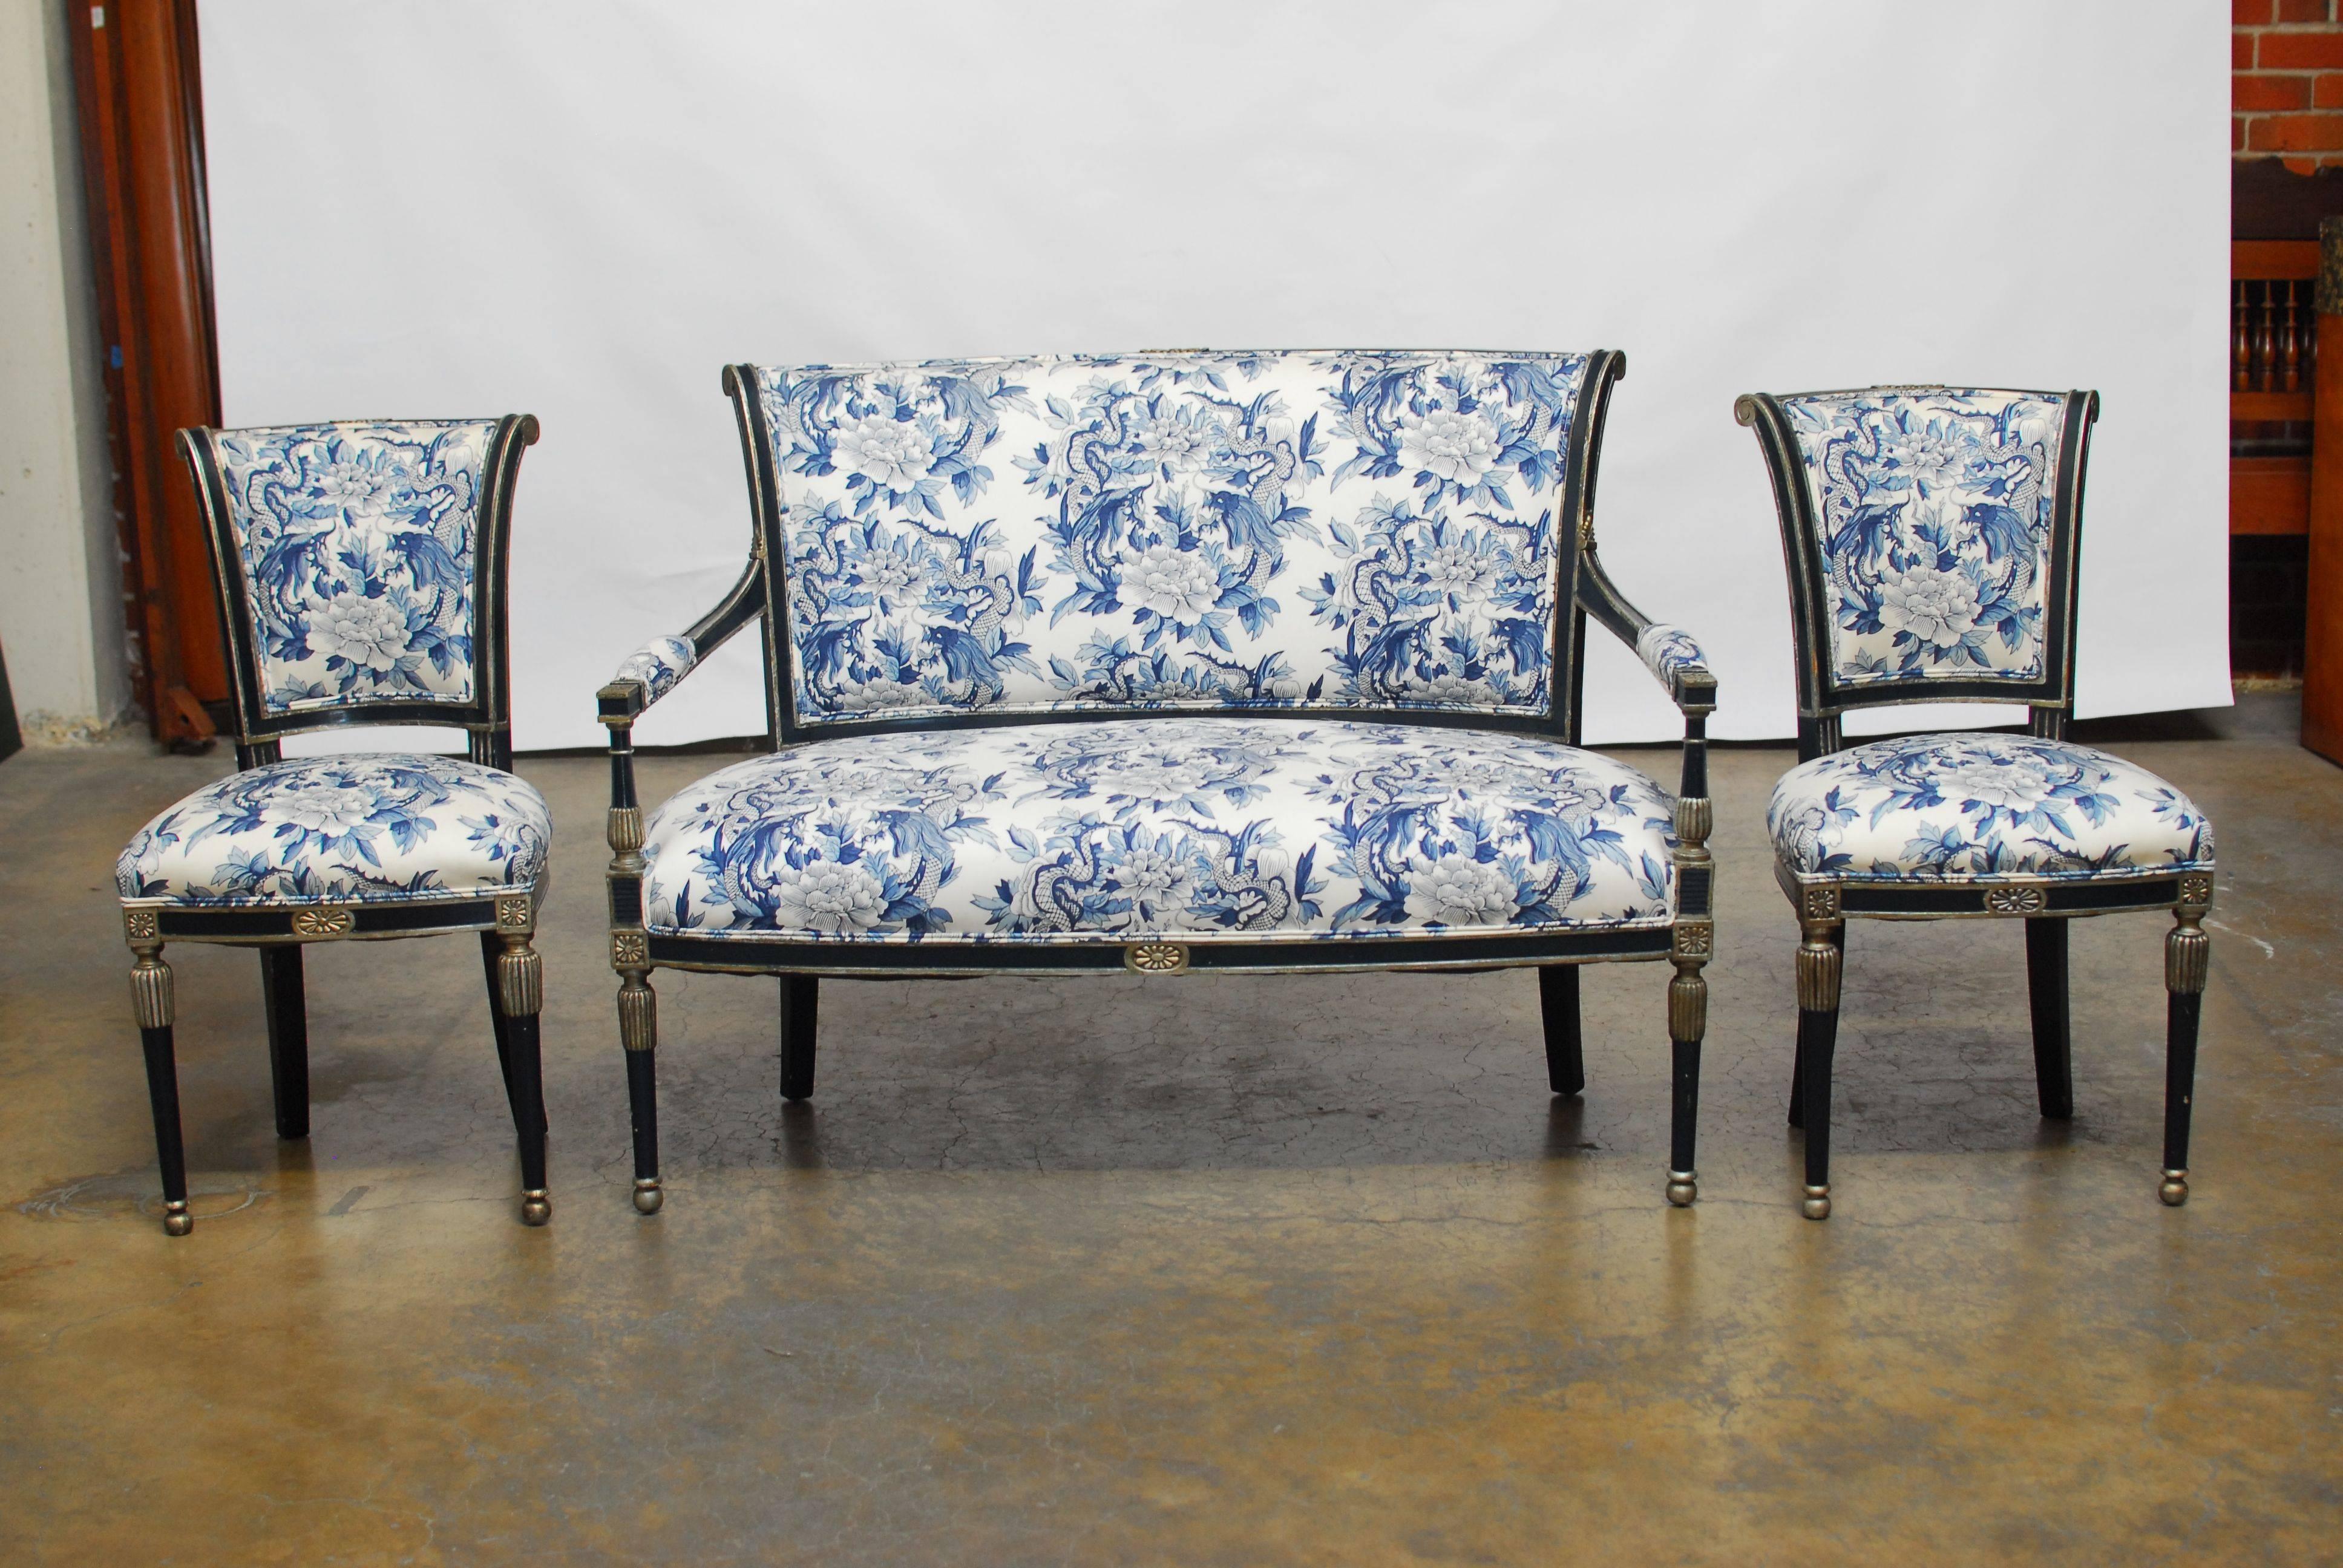 French Directoire Settee with Chinoiserie Dragon Upholstery 3